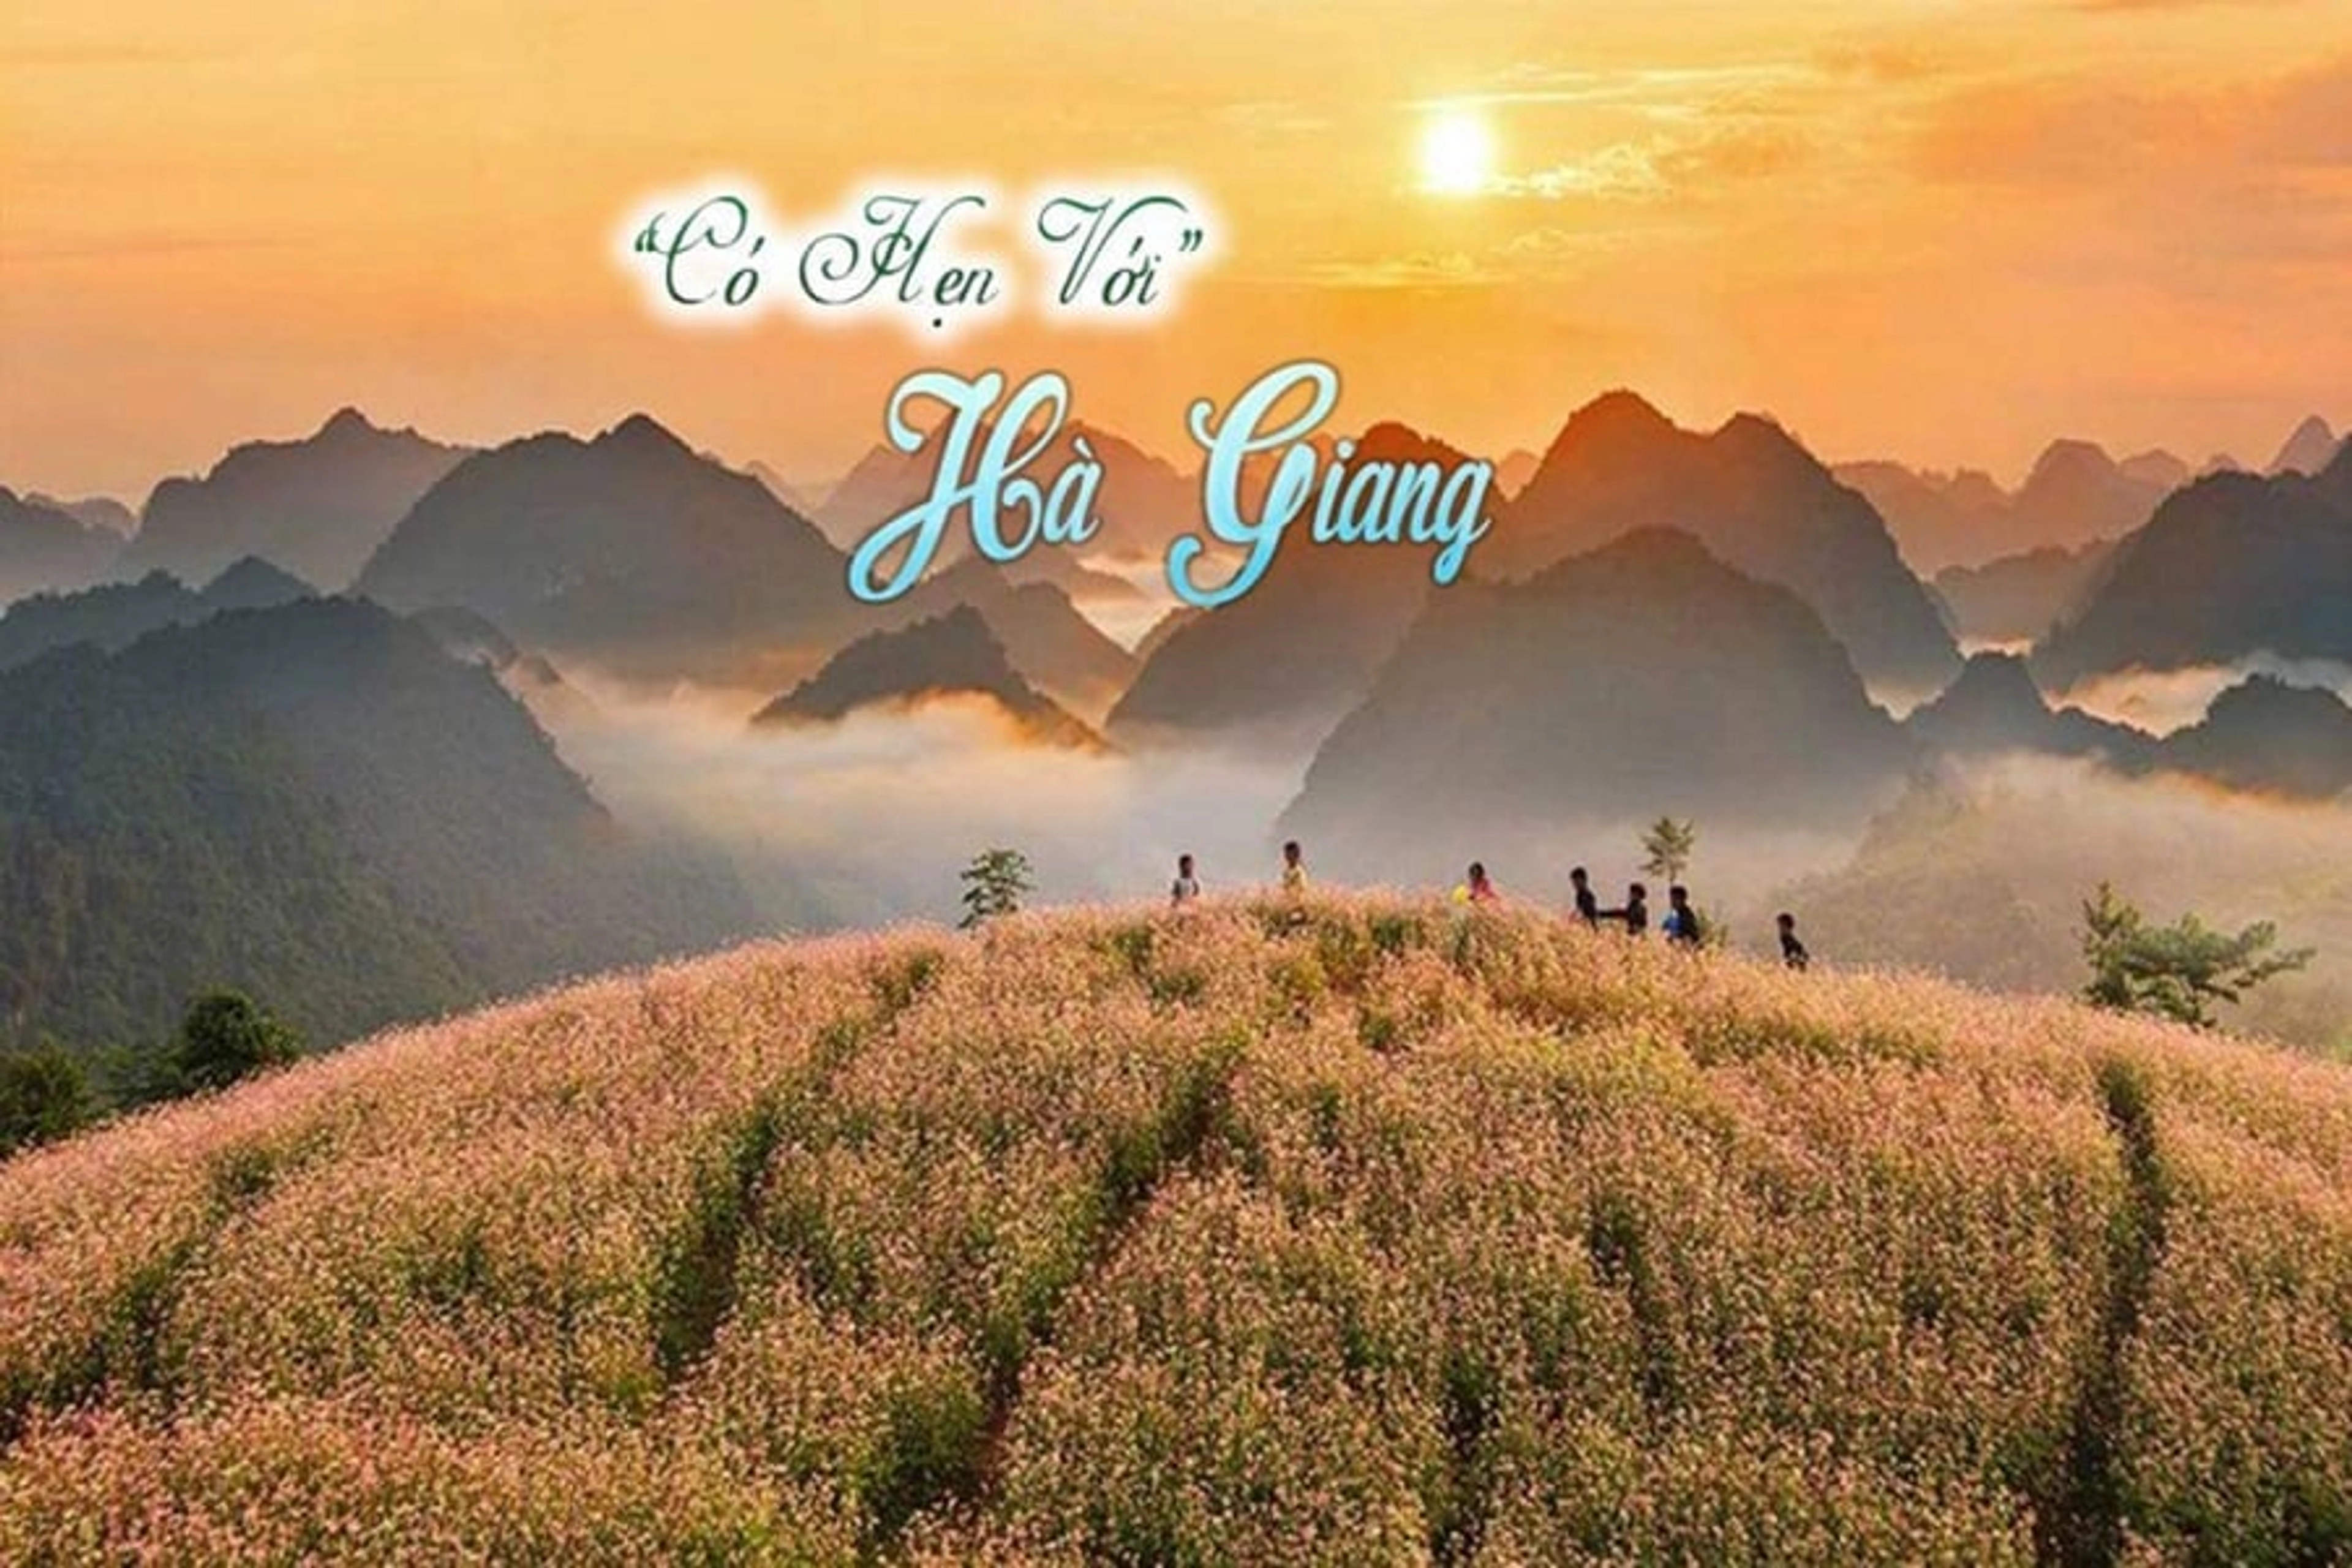 Ha Giang tour - The soul of the stone